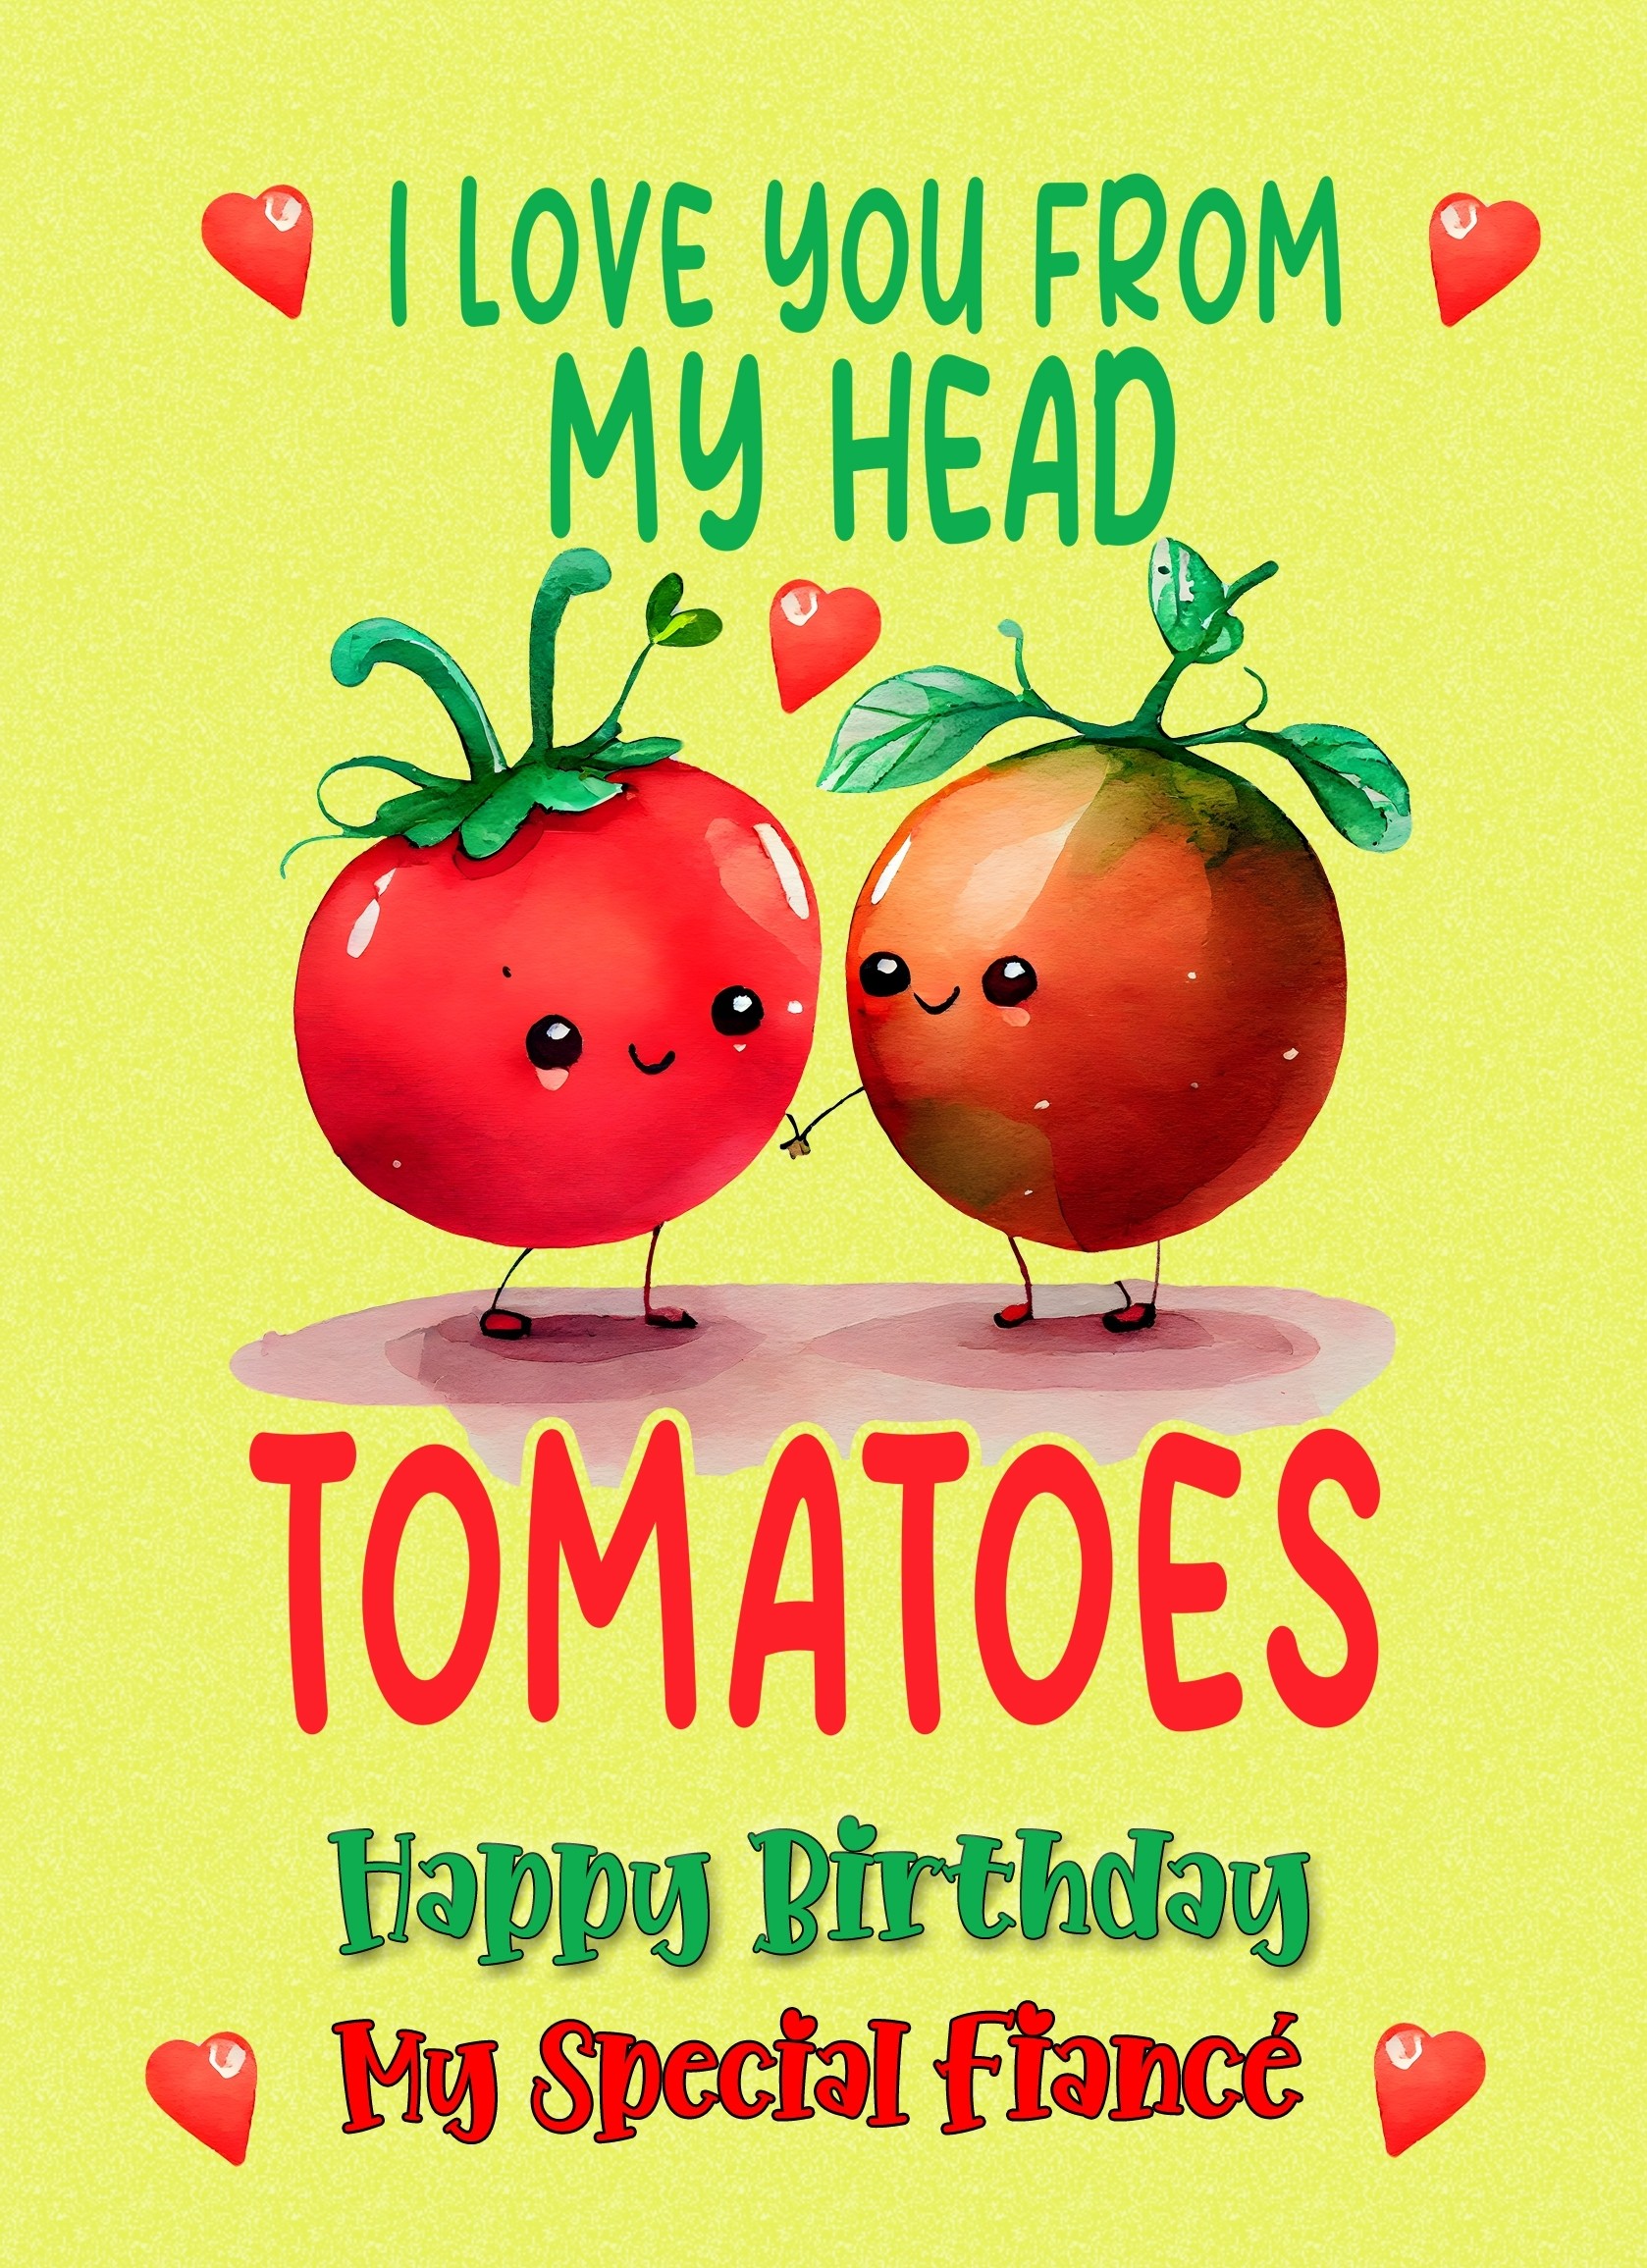 Funny Pun Romantic Birthday Card for Fiance (Tomatoes)